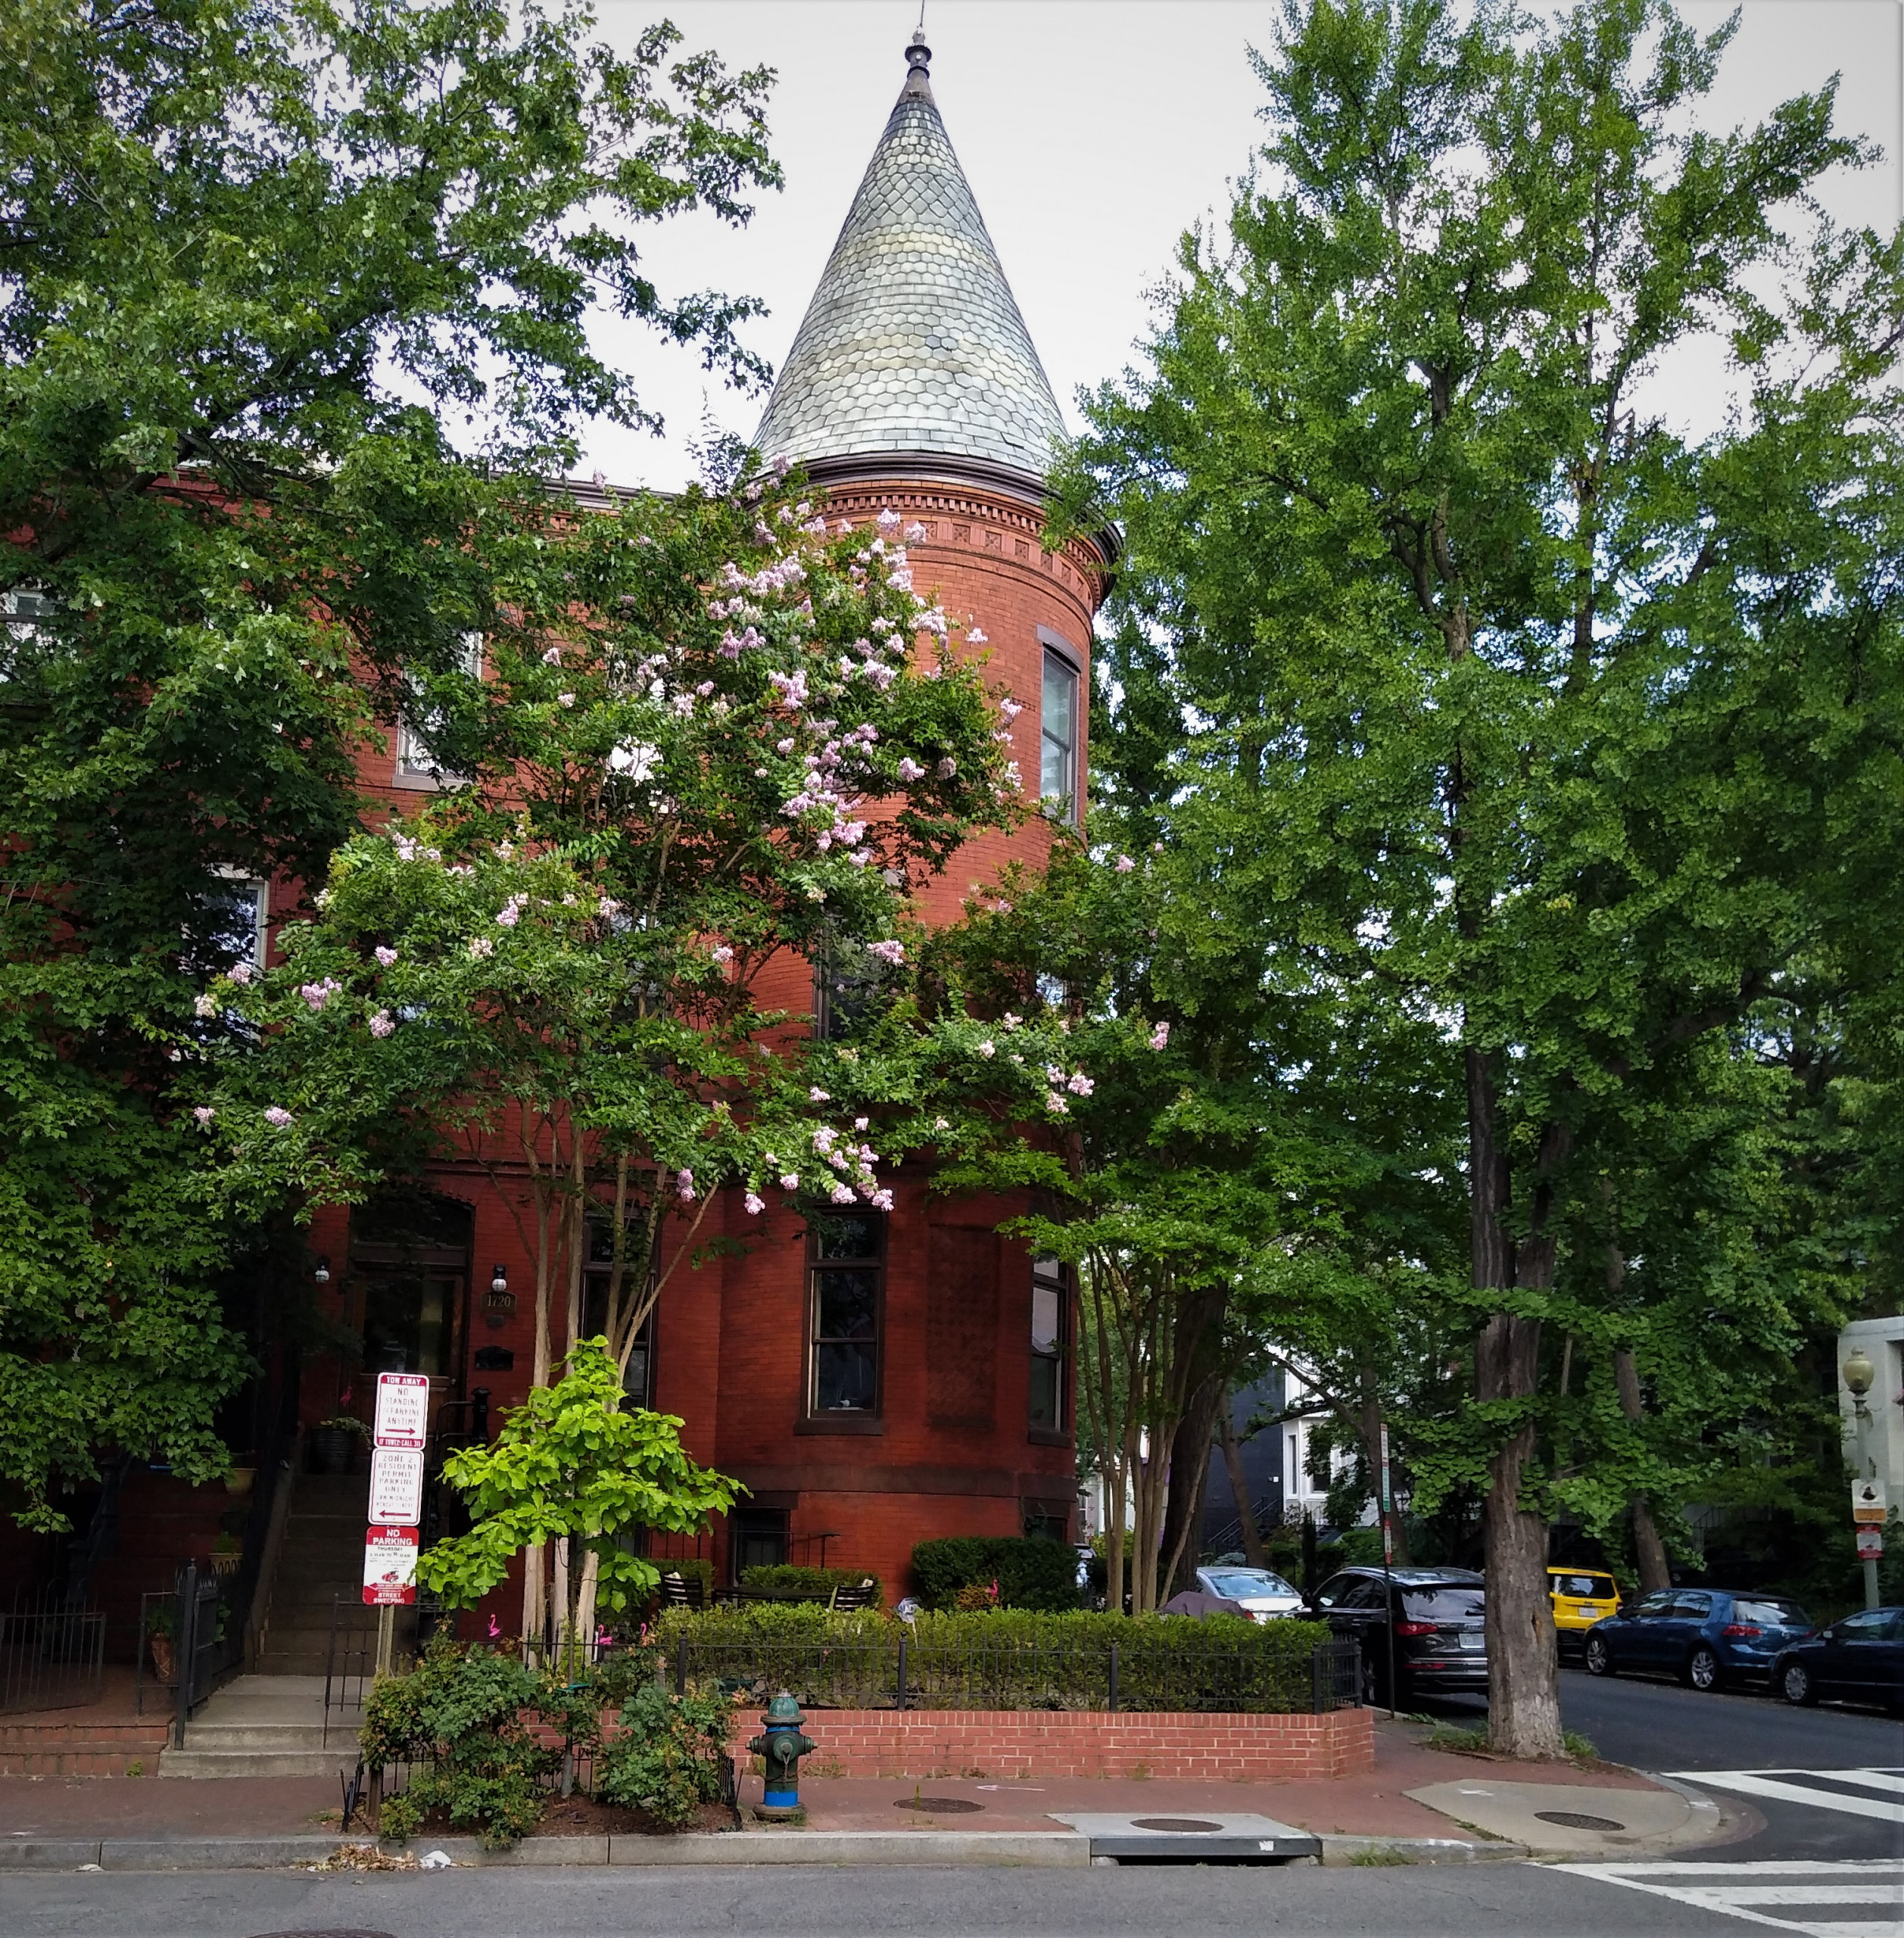 Brick home with a round tower on a corner in Washington, DC